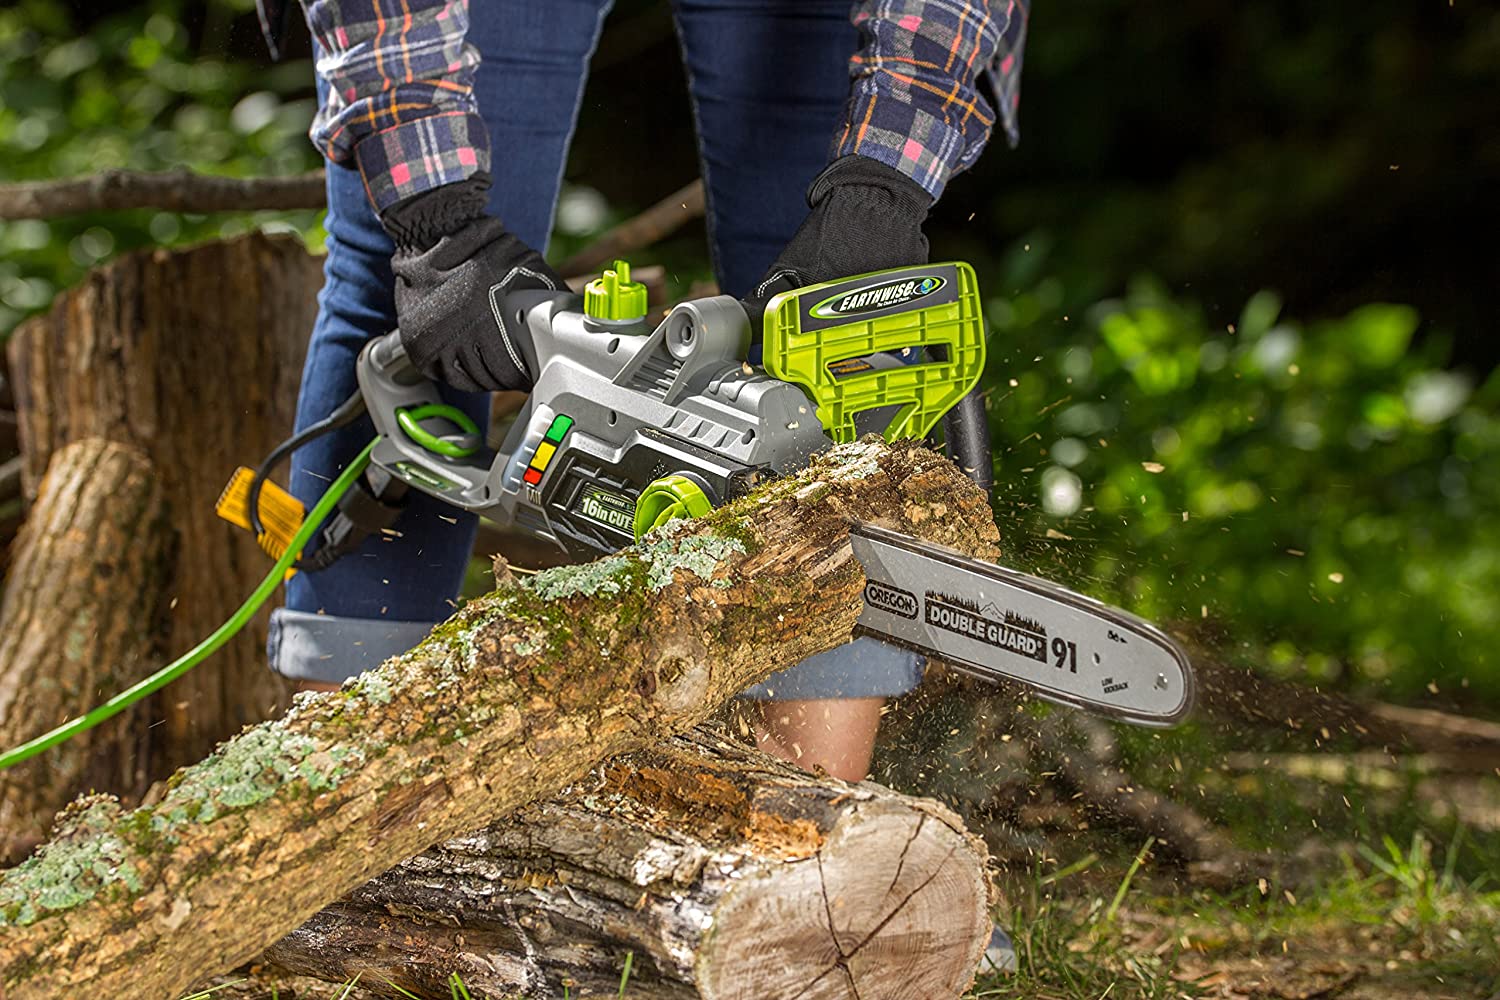 Earthwise CS33016 Corded Electric Chainsaw